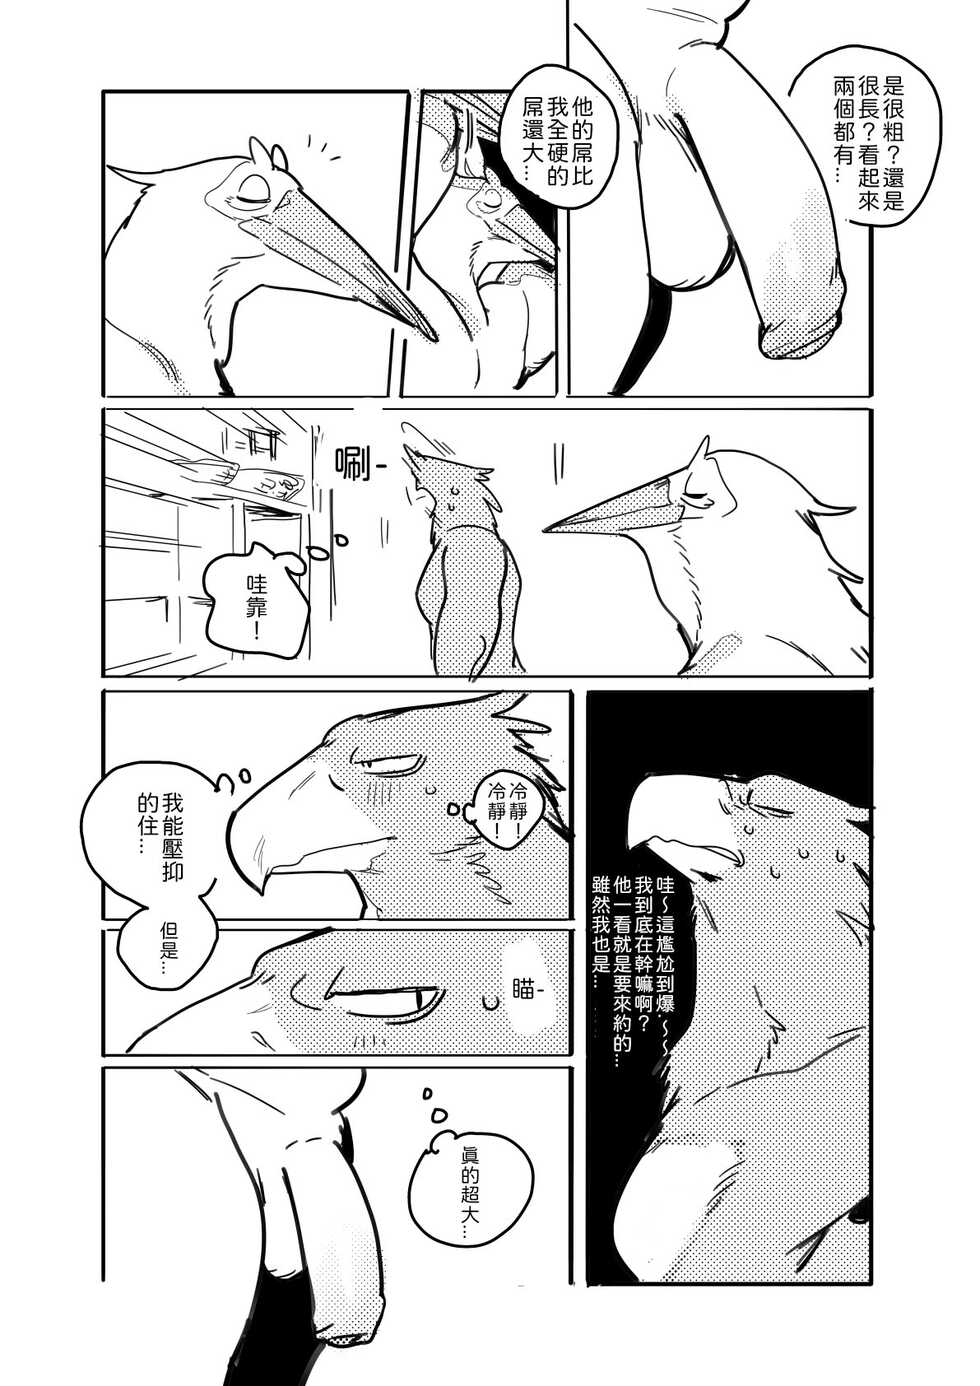 Pelican and White-tailed Eagle 鵜鶘和白尾鷹 - Page 3